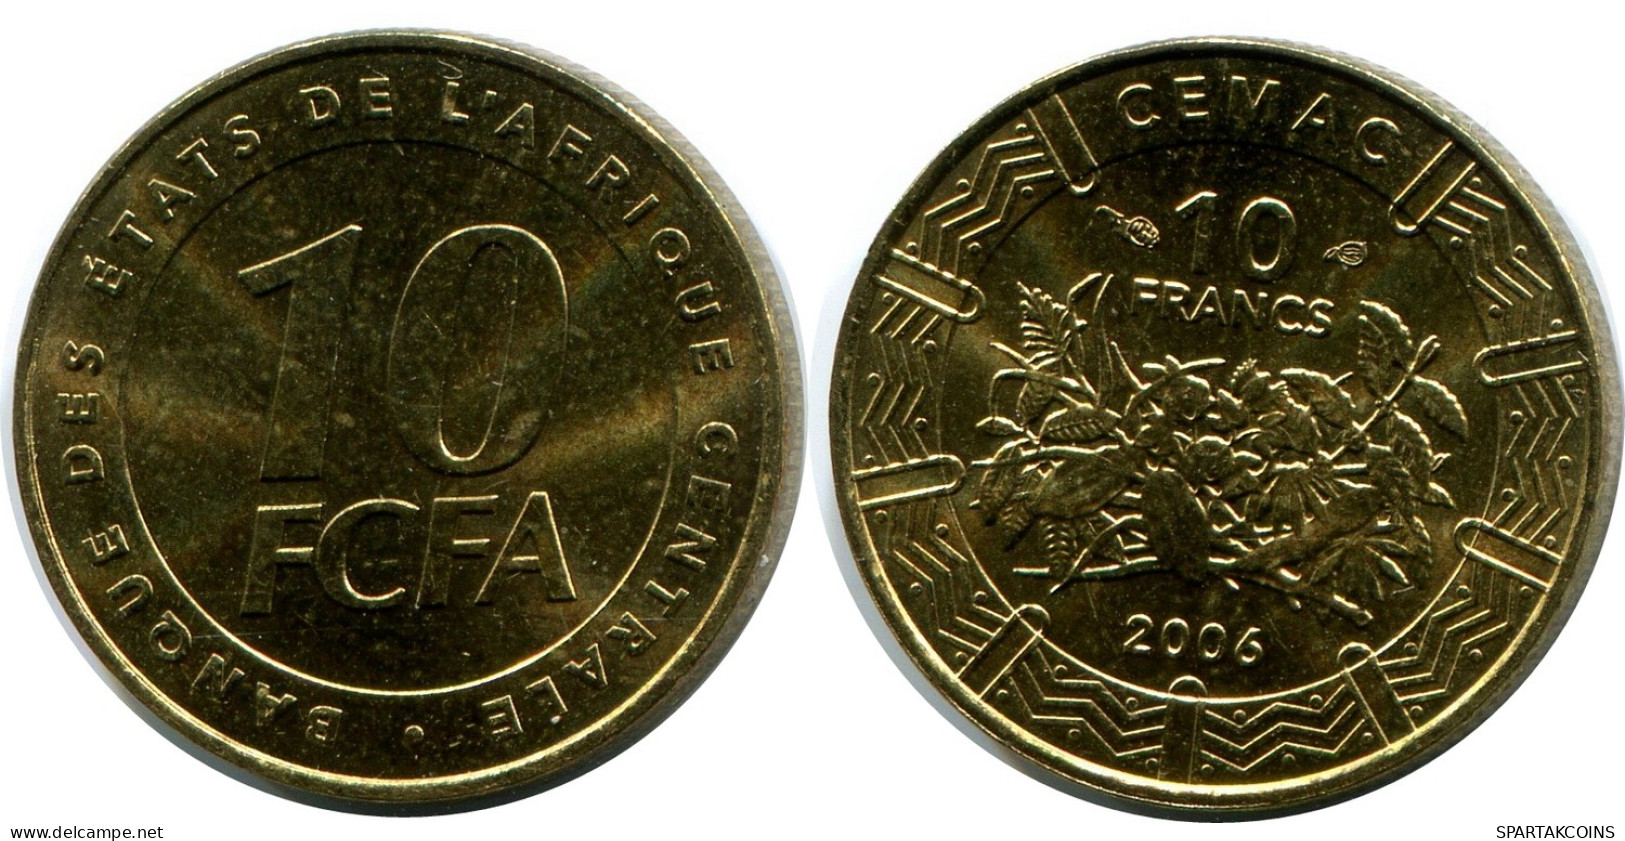 10 FRANCS CFA 2006 CENTRAL AFRICAN STATES (BEAC) Coin #AP862.U - Centraal-Afrikaanse Republiek